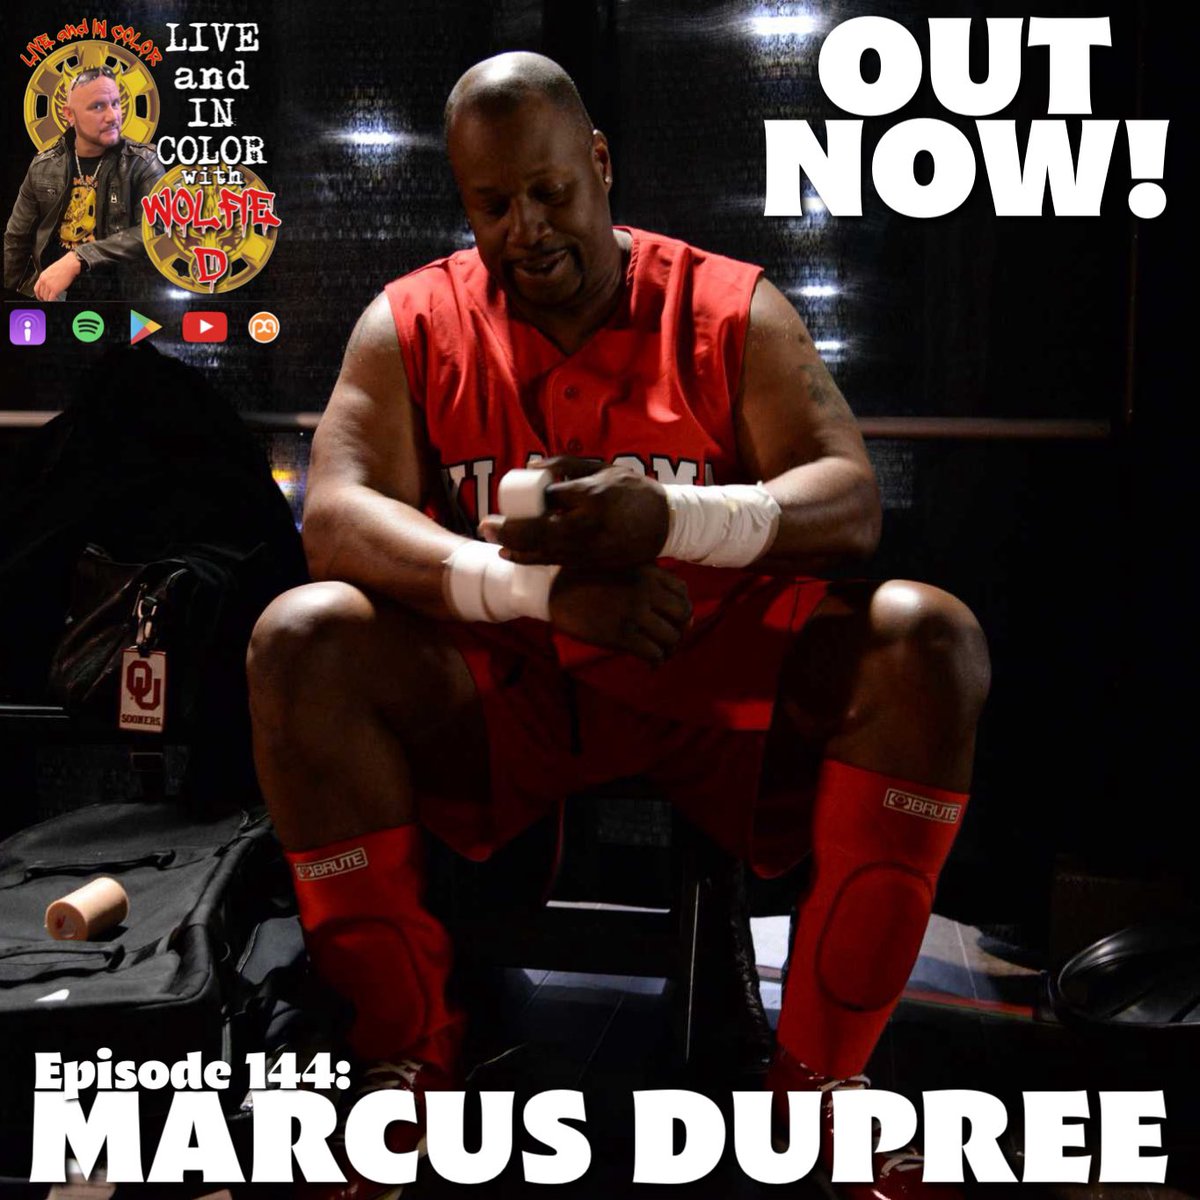 OUT NOW! Marcus Dupree! From his younger days, Marcus knew two things. Football & wrestling! That never changed! OU Sooners, NFL, USWA, movies & more! Enjoy! @SpeedbyDupree podcasts.apple.com/us/podcast/liv… youtu.be/6LP3edTHxLI?si… open.spotify.com/episode/3D3mZN… podcasters.spotify.com/pod/show/wolfi…